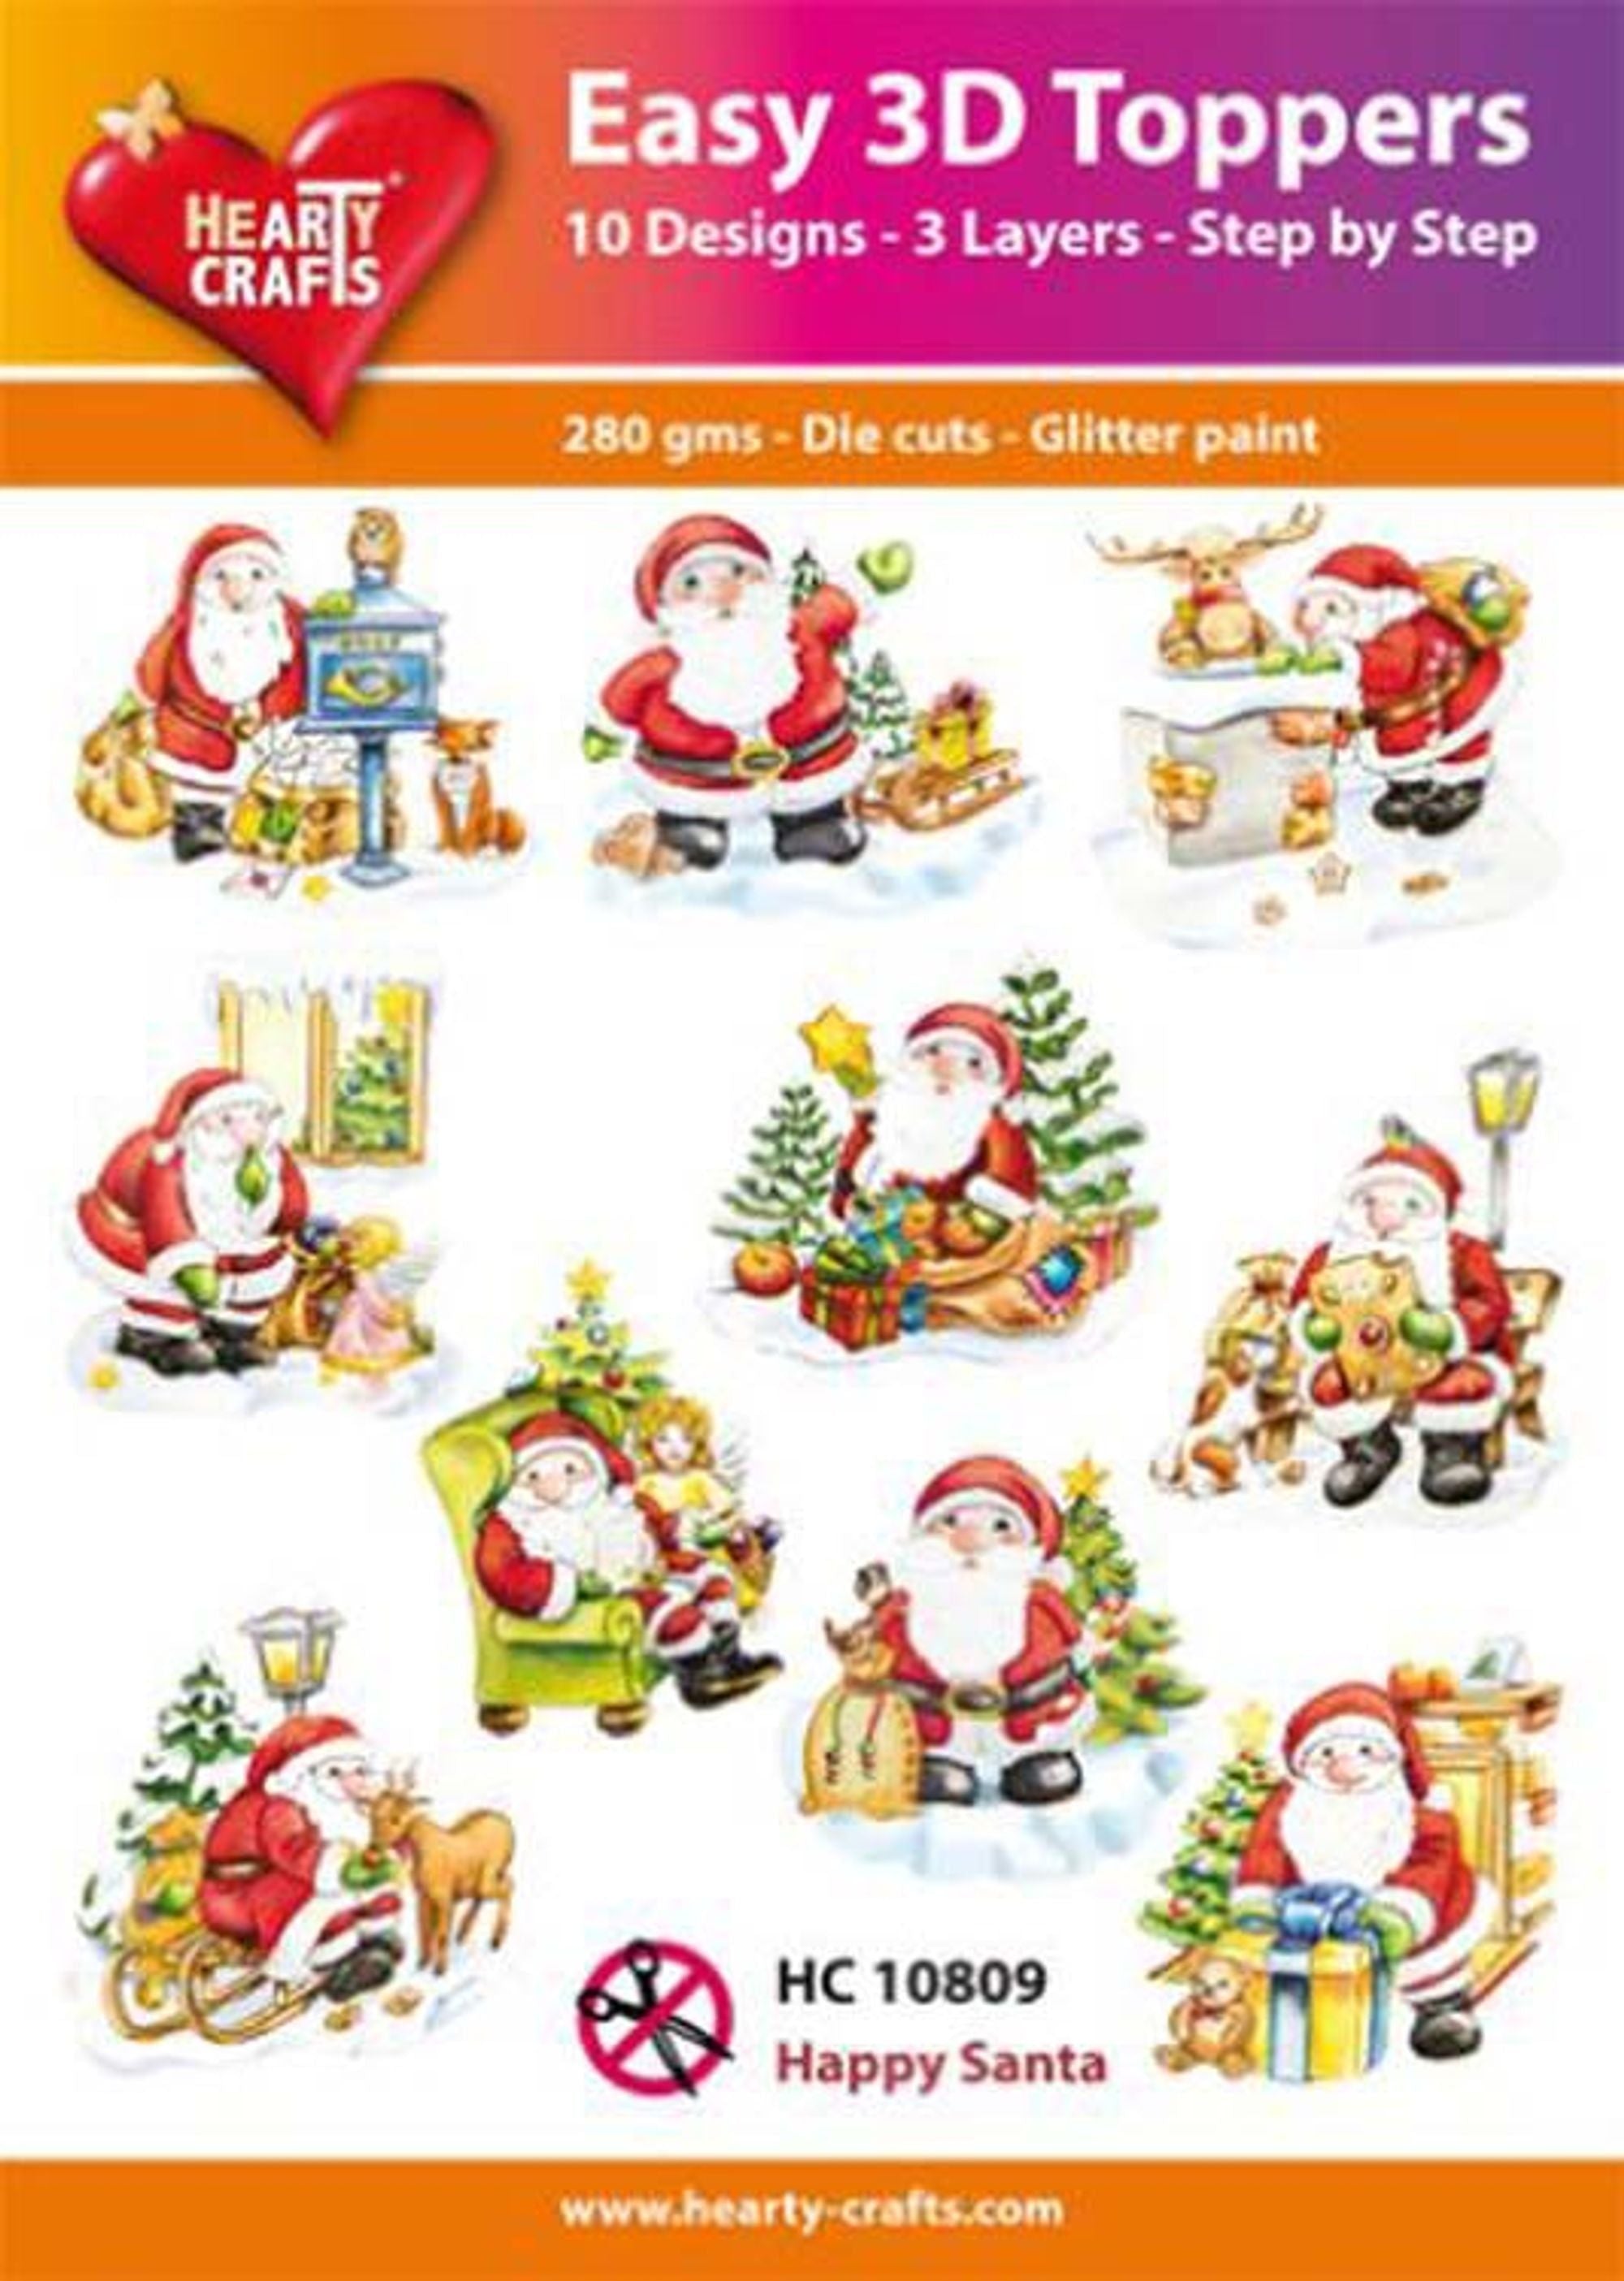 Hearty Crafts Easy 3D Toppers - Happy Santa